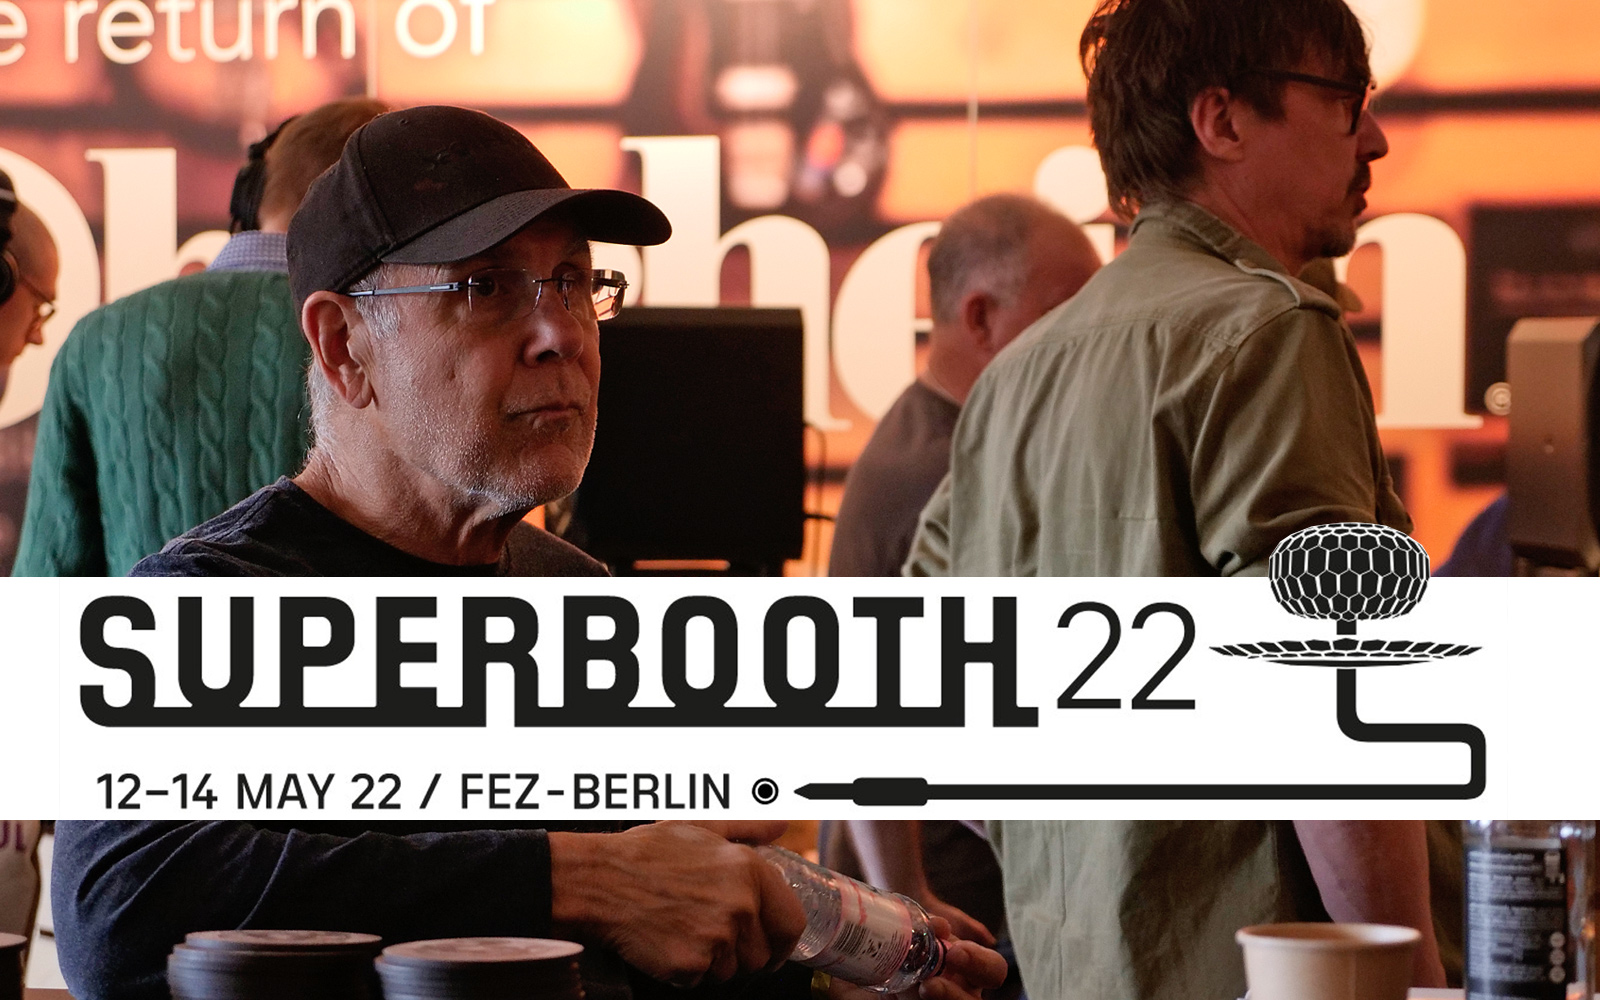 Superbooth22 - Synthmesse Berlin